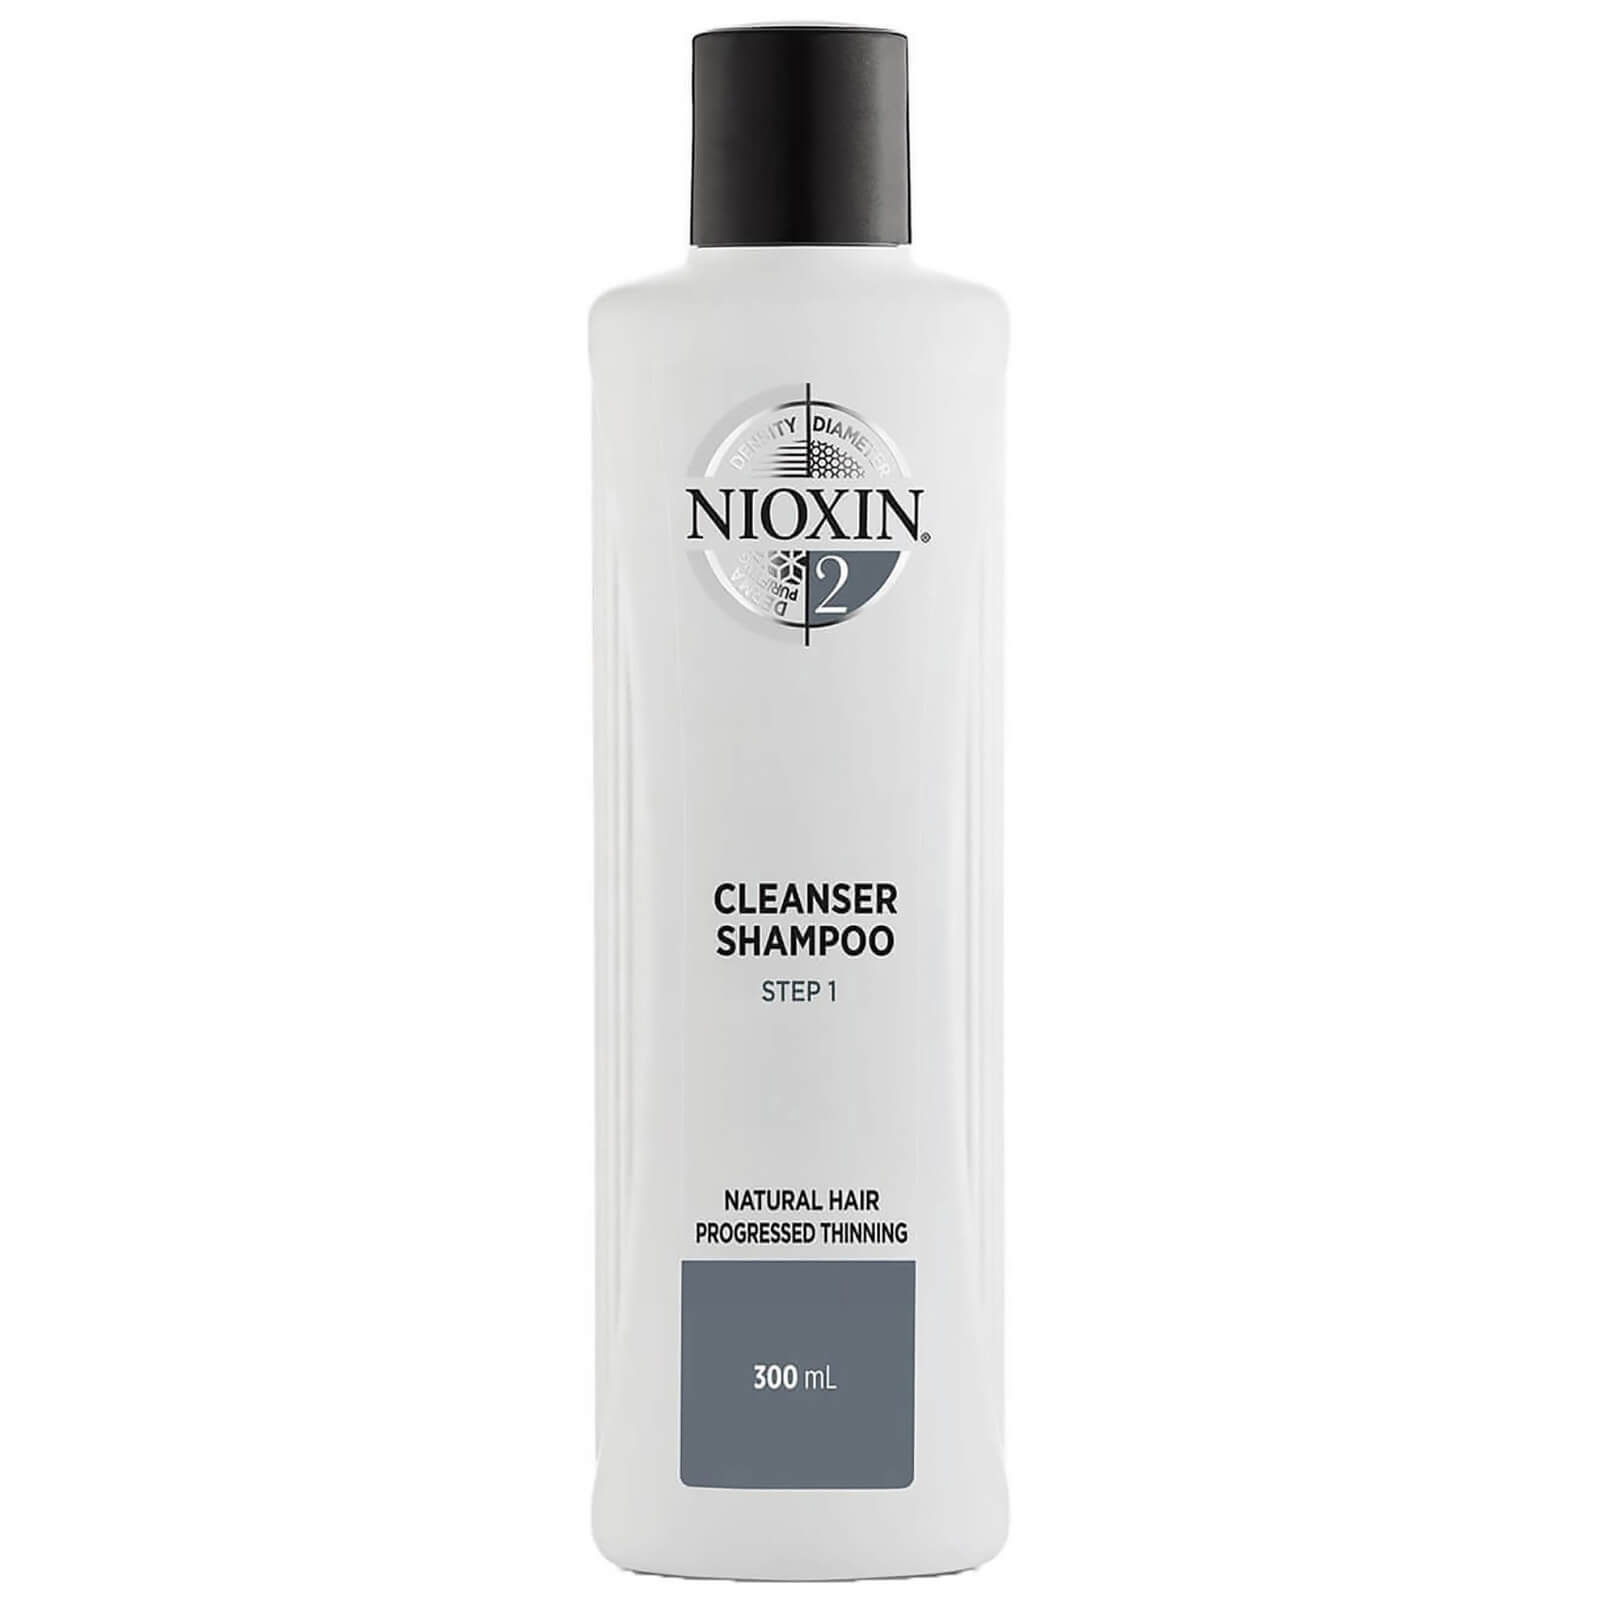 Shampo Detergente 3-Part System 2 for Natural Hair with Progressed Thinning NIOXIN 300ml